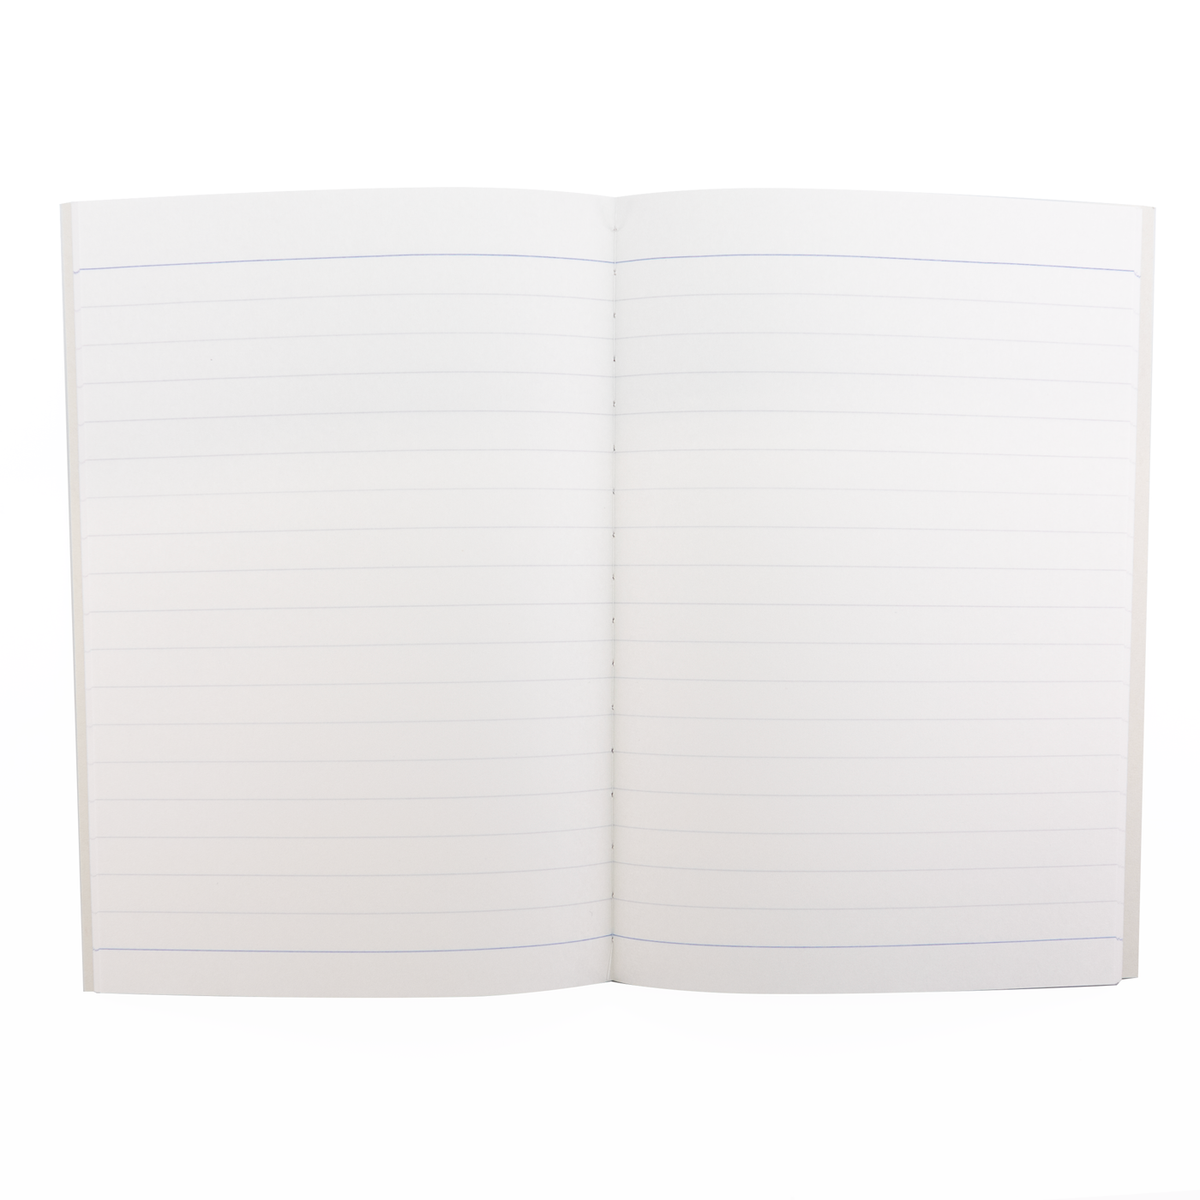 Tsubame 10mm Wide Ruled A5 Notebook